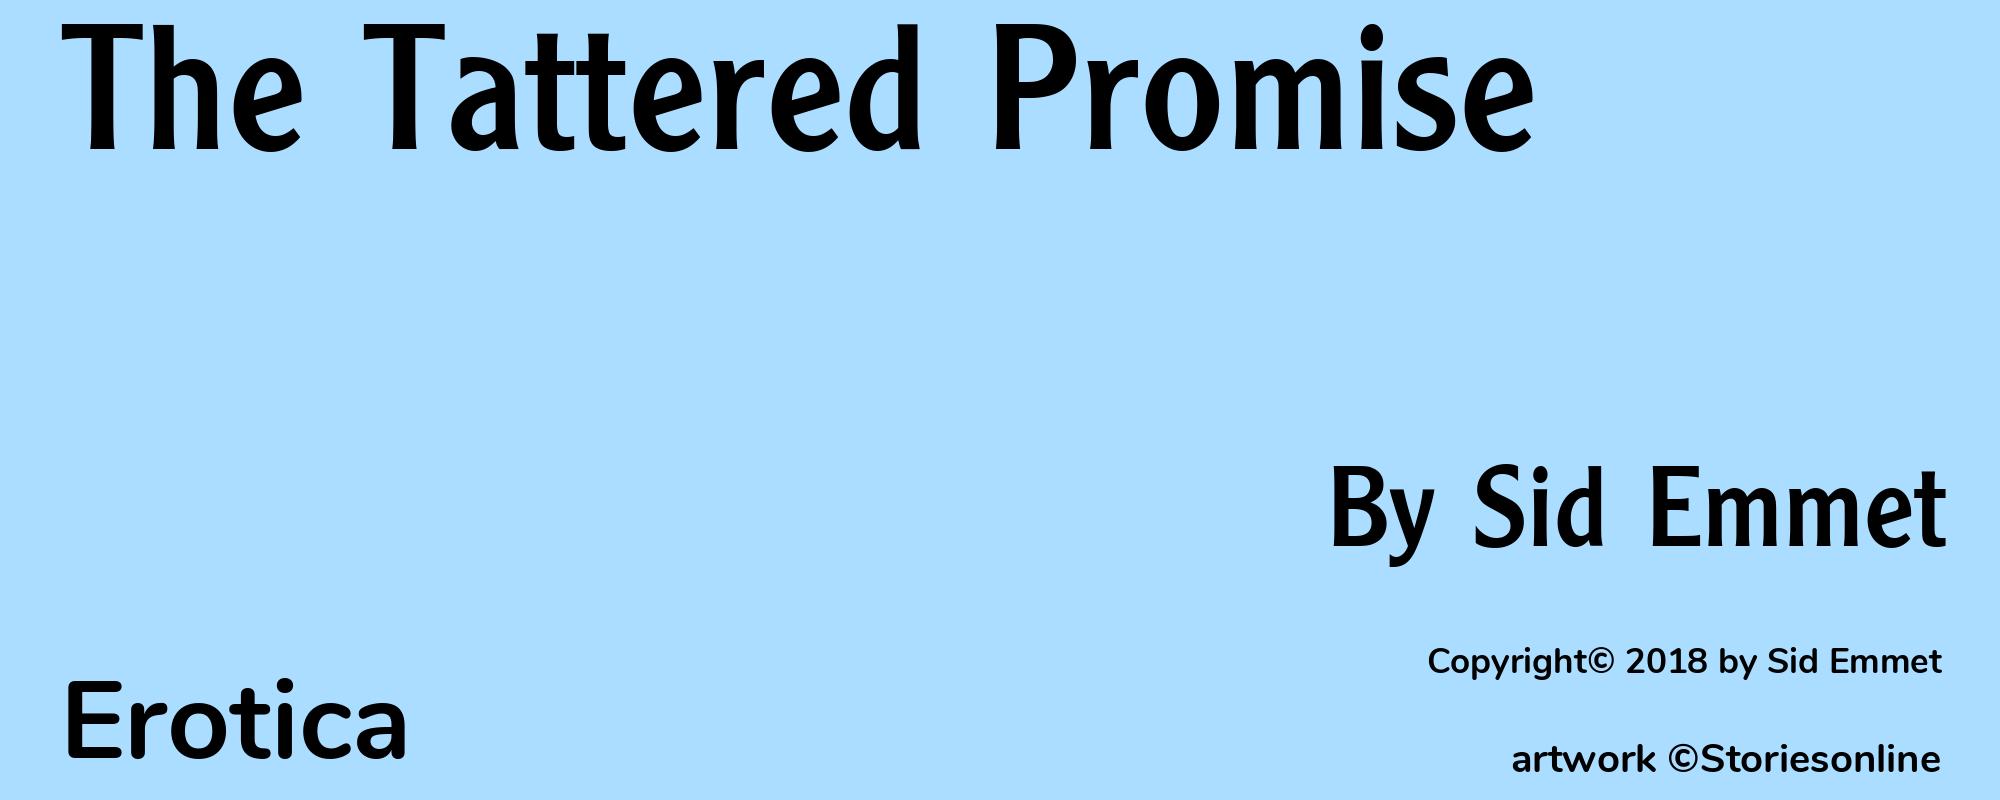 The Tattered Promise - Cover